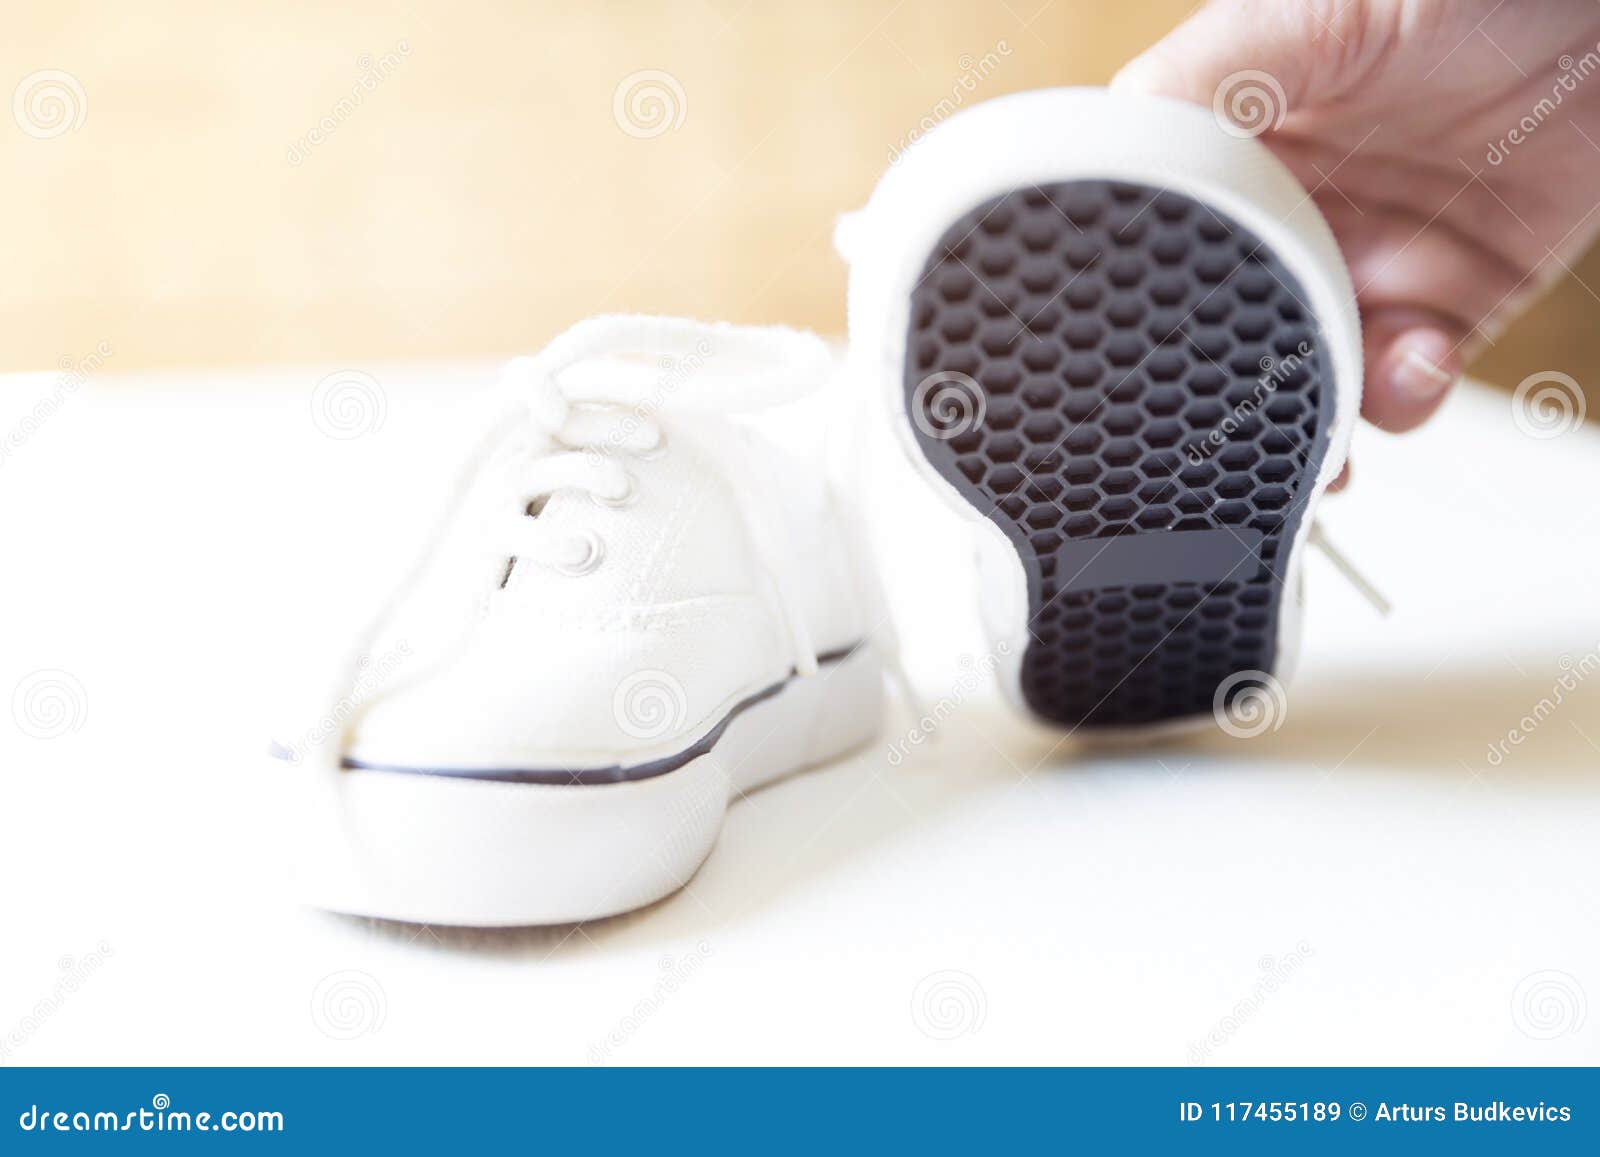 White Baby Sneakers. Maternity and Newborn Concept Stock Image - Image ...